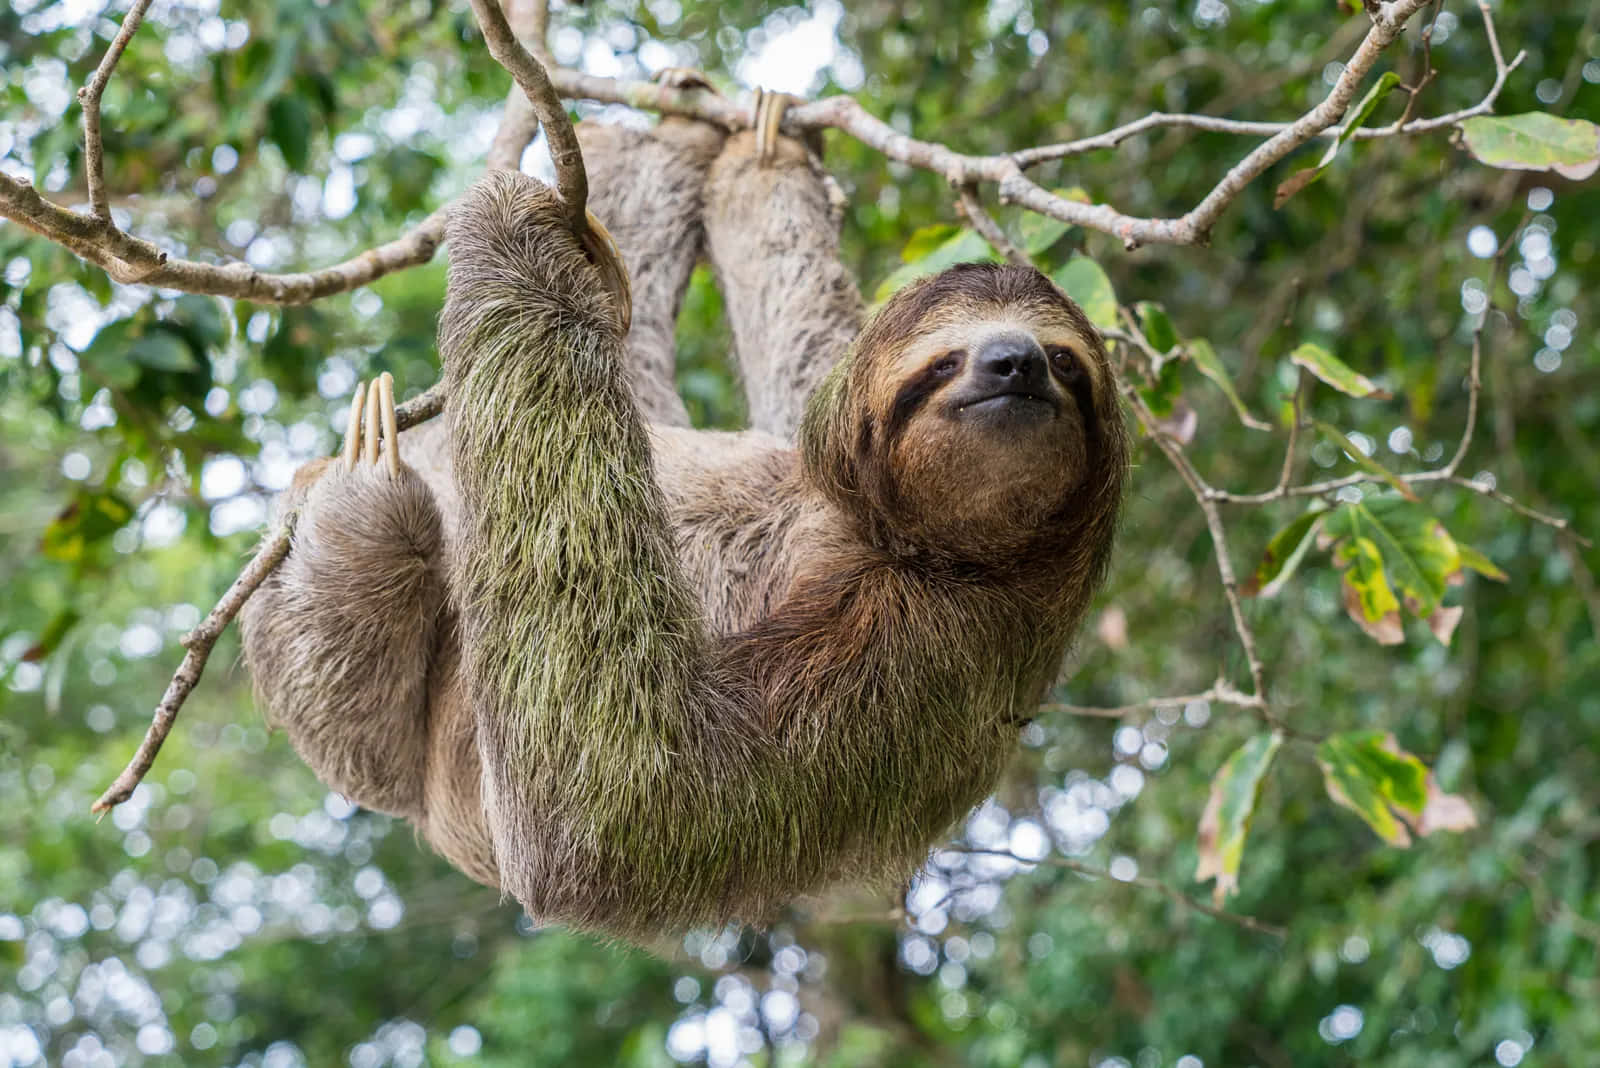 Sloth hanging motionless against a tree, taking a moment of relaxation.